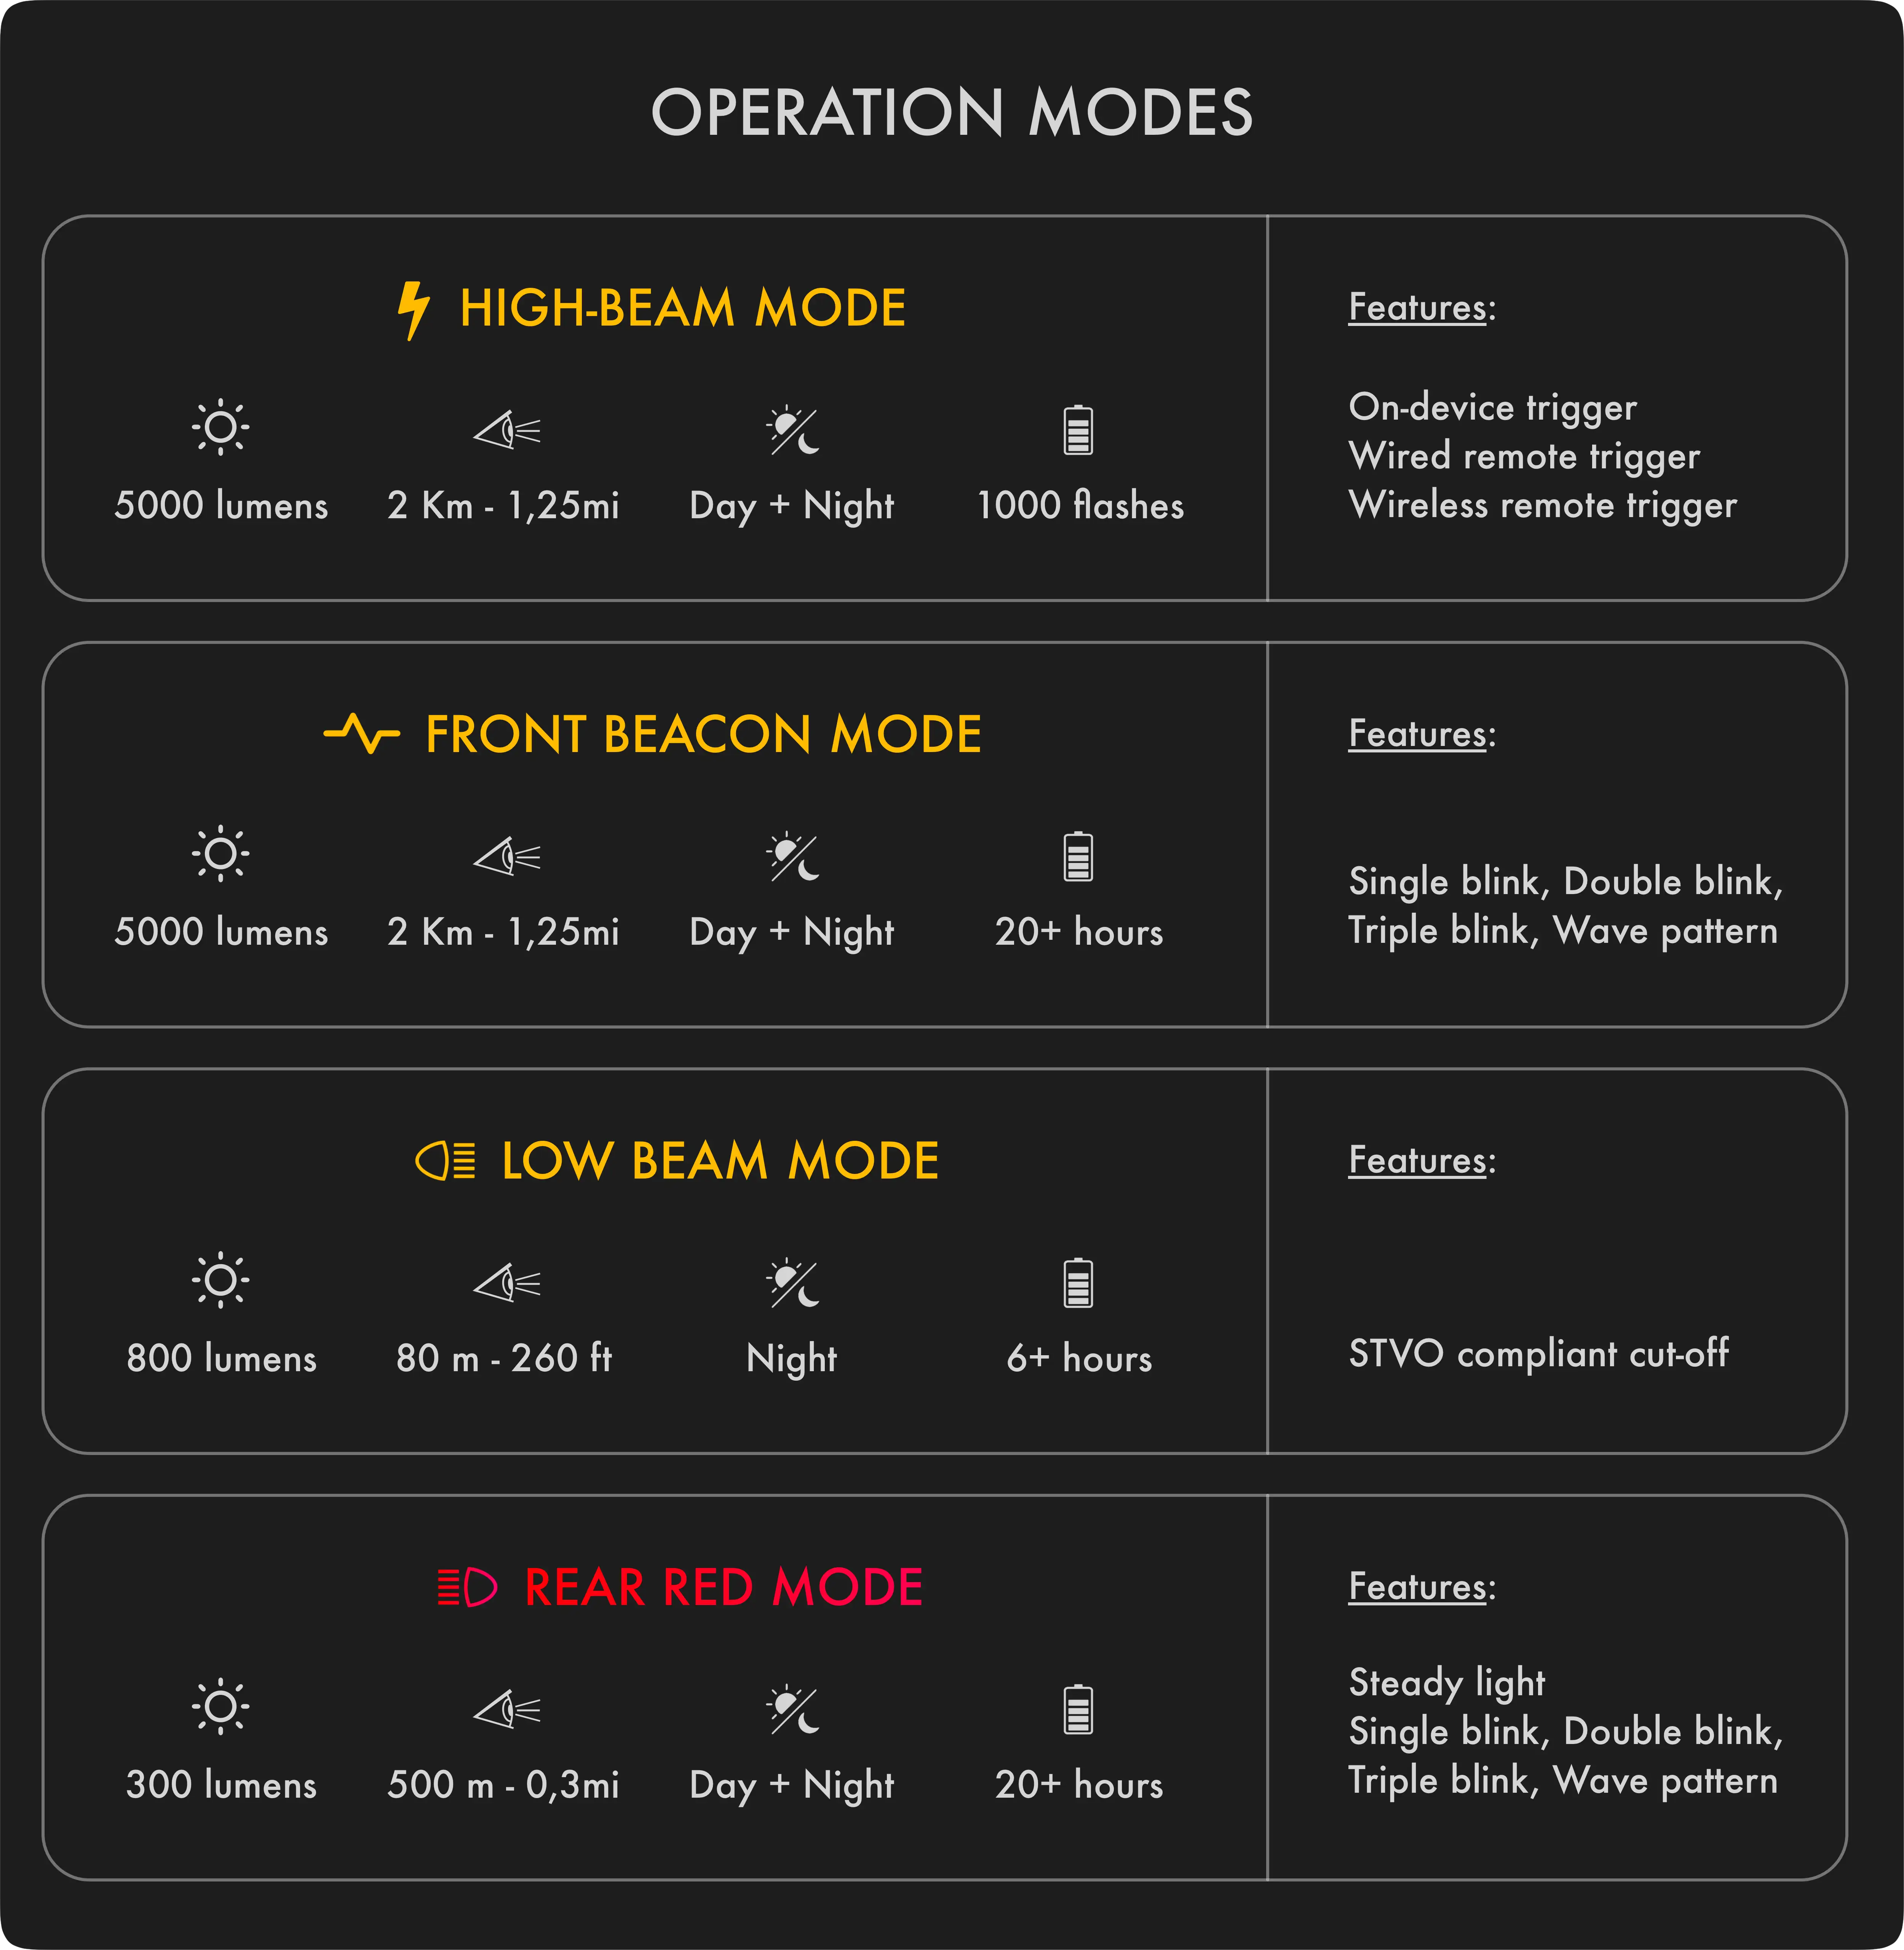 Operational modes